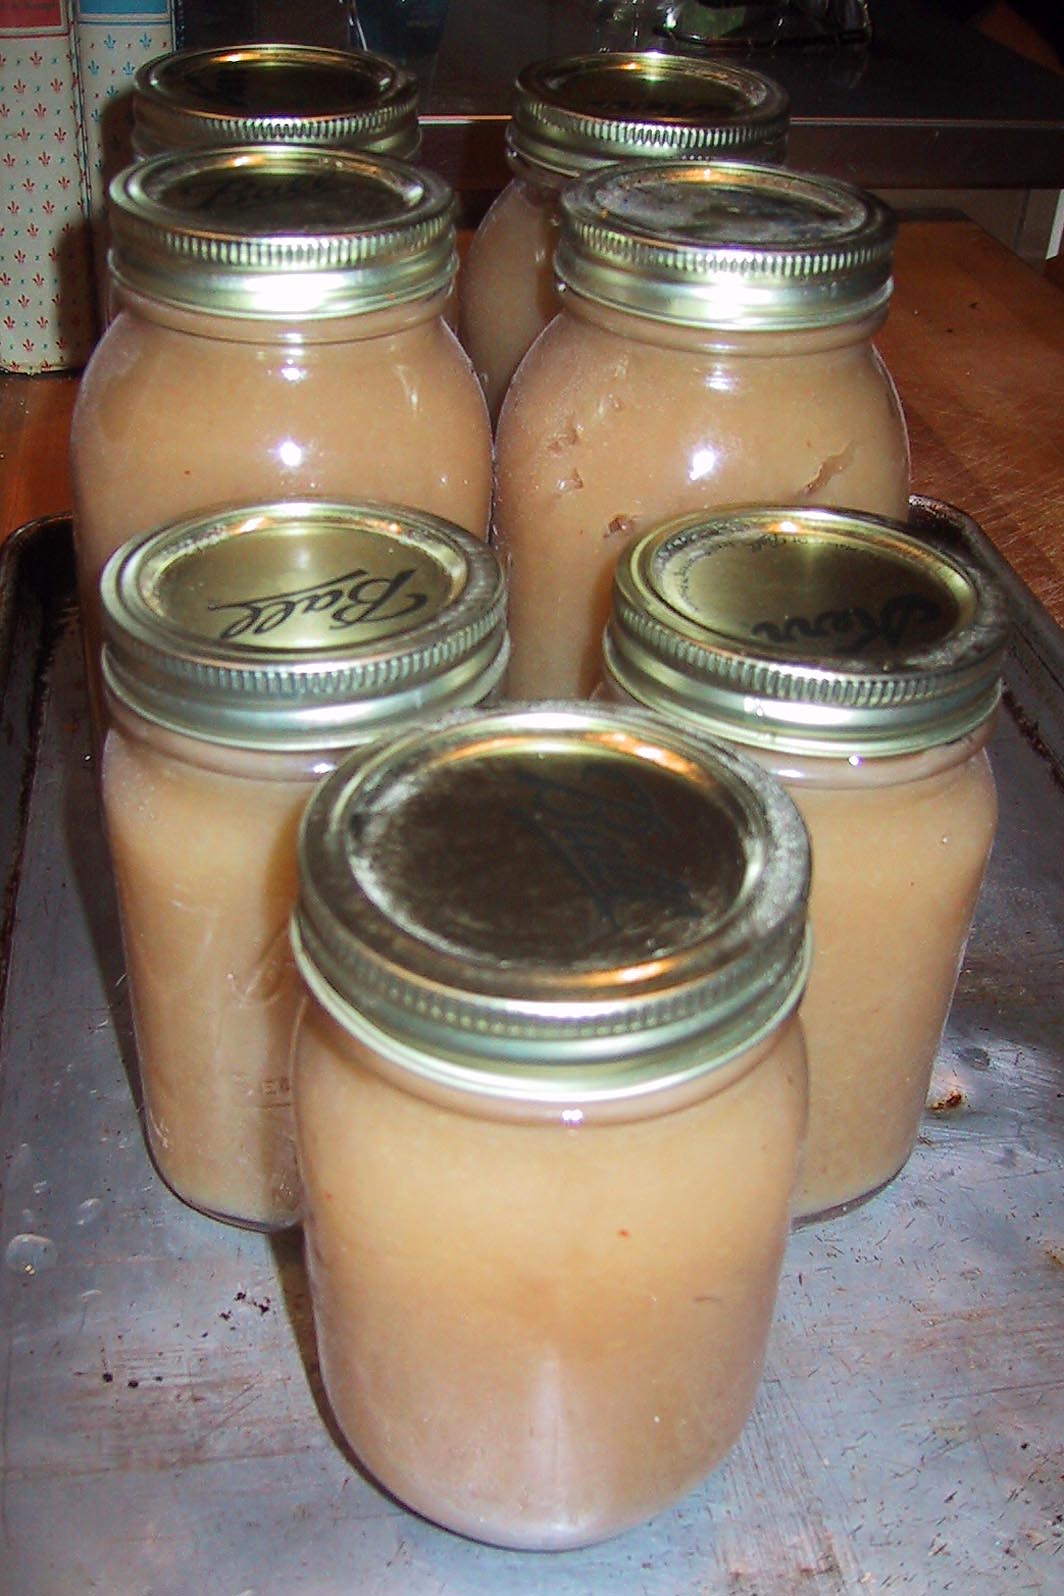 Finished jars of sauce